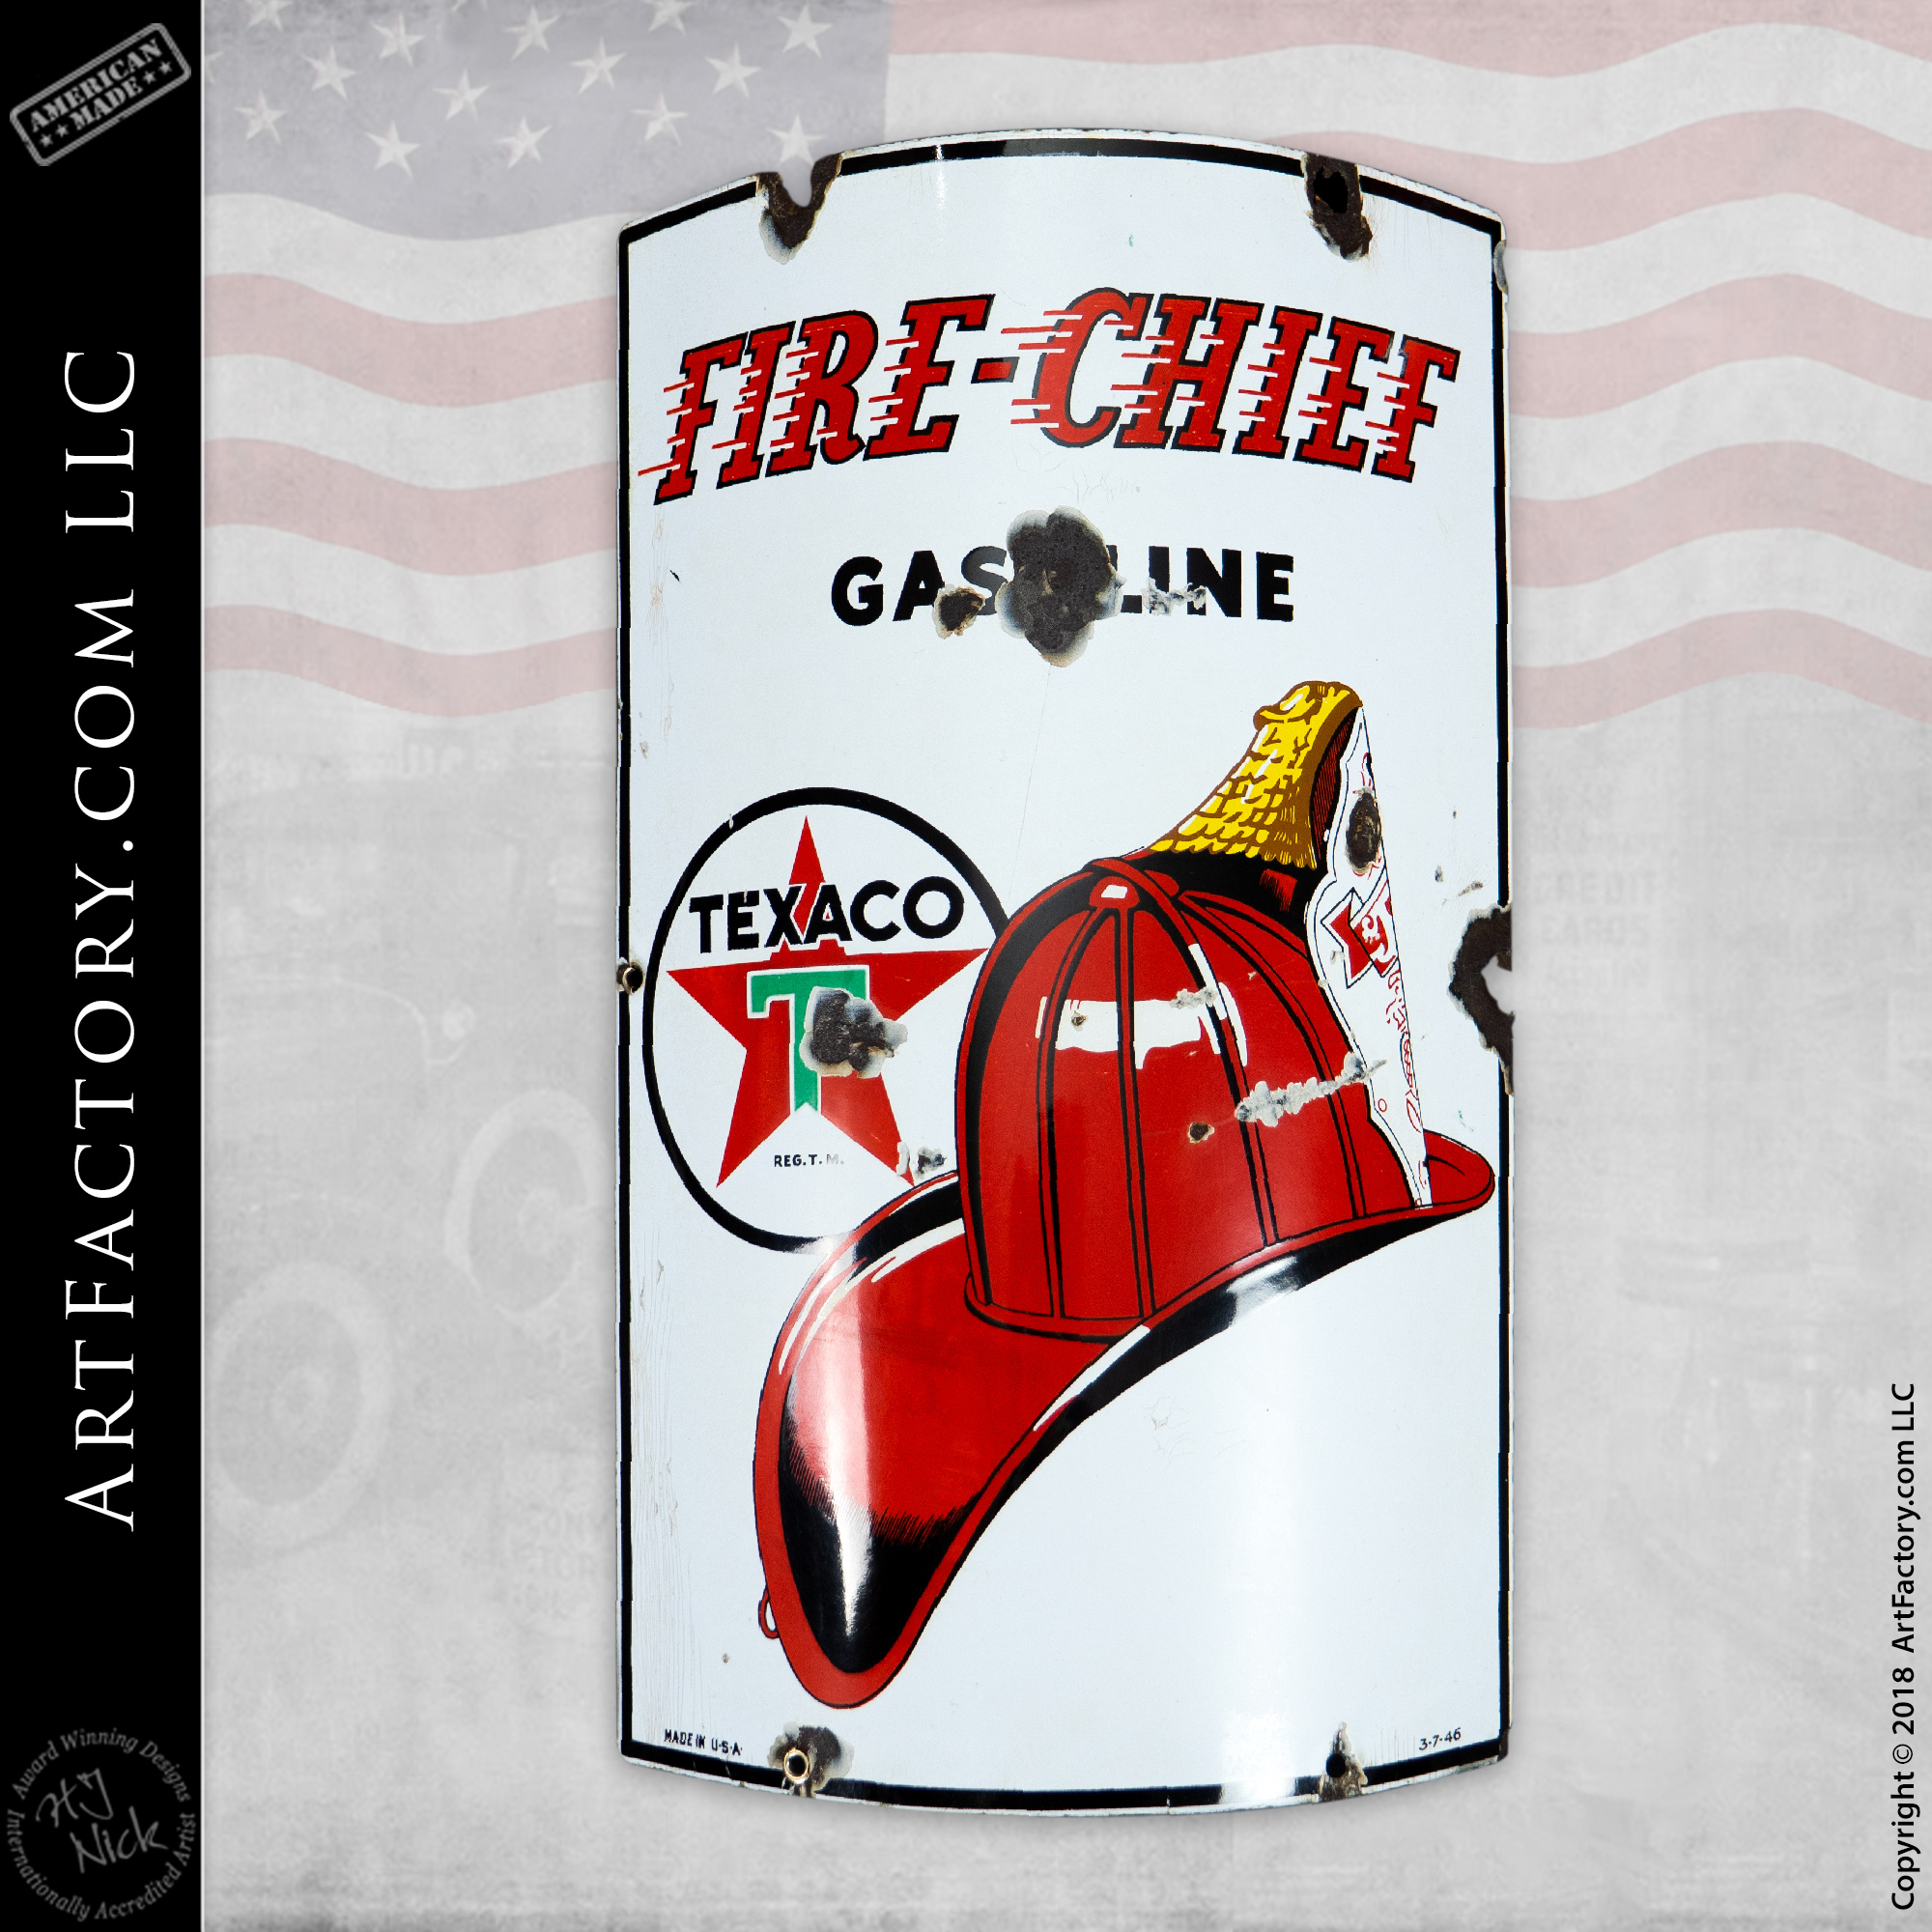 Details about   Texaco Fire Chief Vintage Style Porcelain Signs Gas Pump Man Cave Station #2 